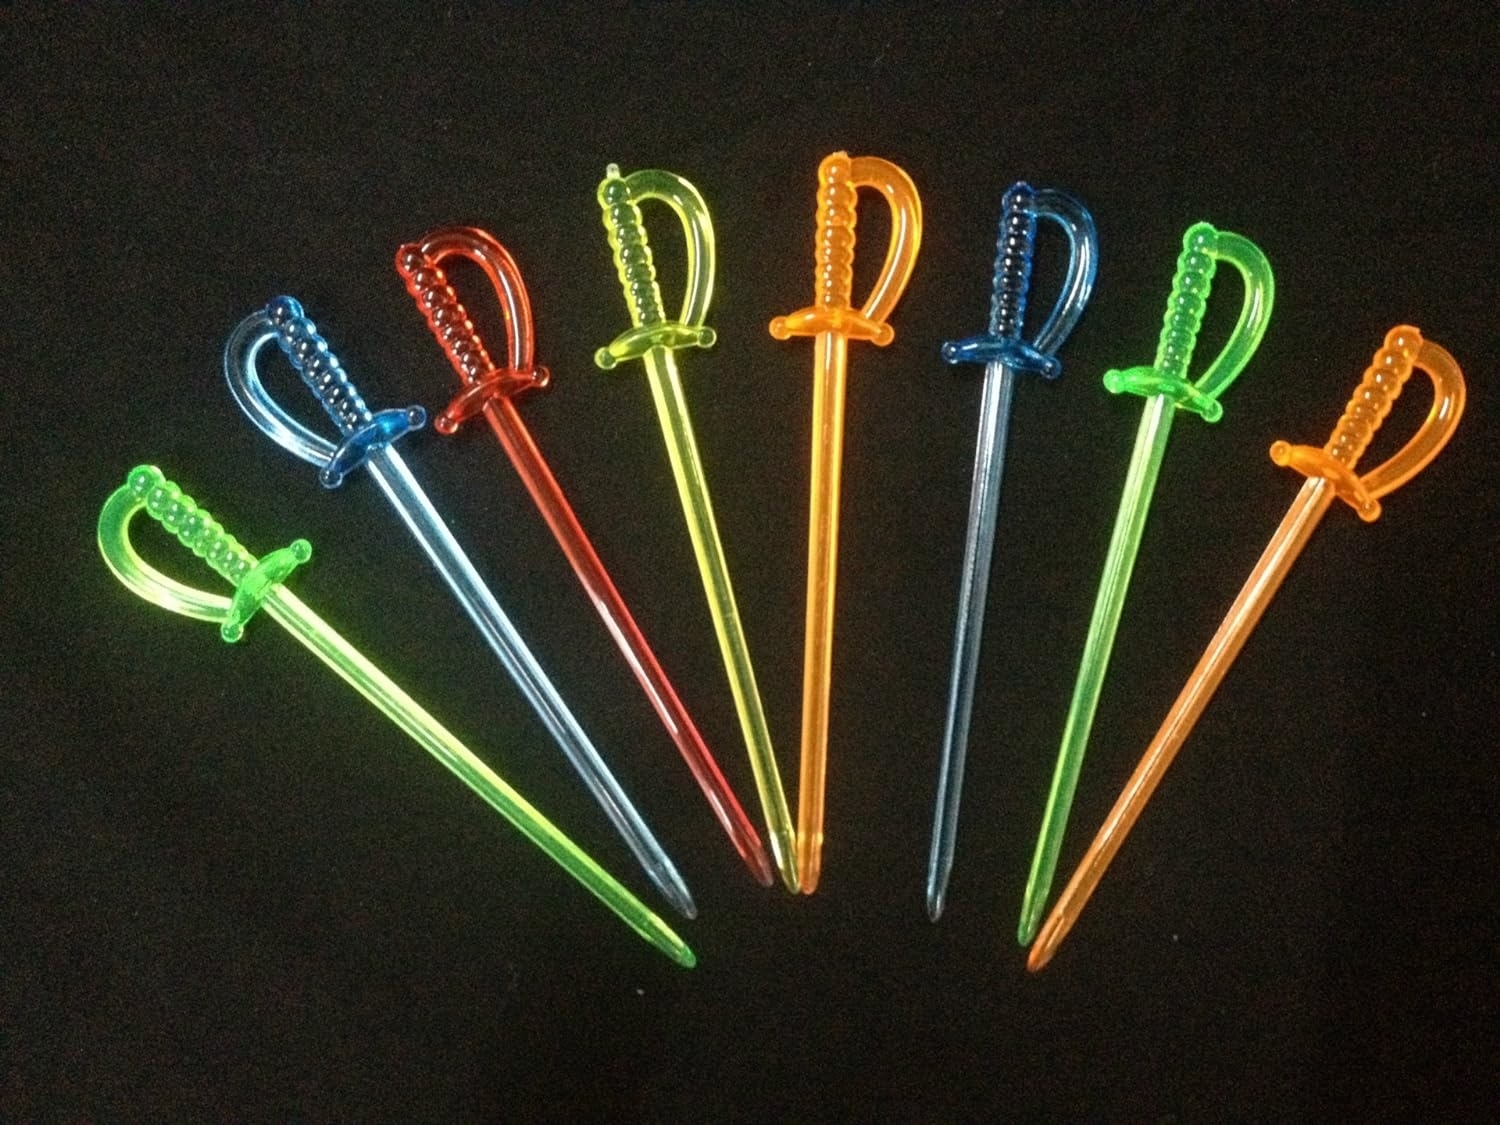 Seven plastic cocktail swords are laid out side by side in a row against a black background